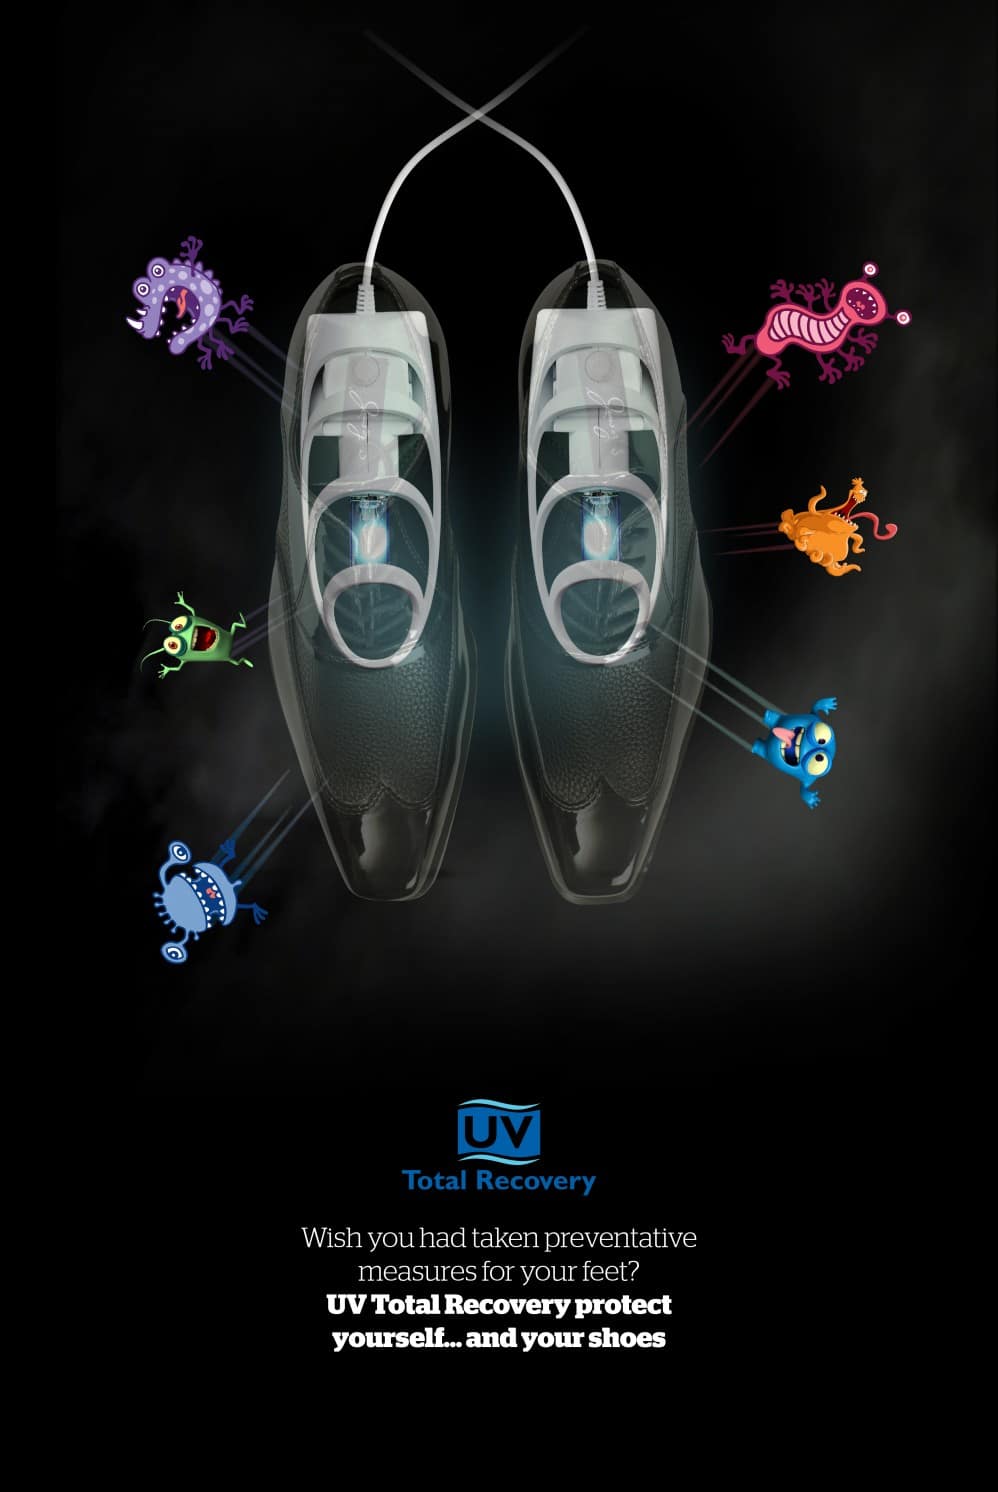 Home Care Wholesale® UV Ultraviolet Drying Deodorizer/Ionizer fit for Shoes Deodorization 